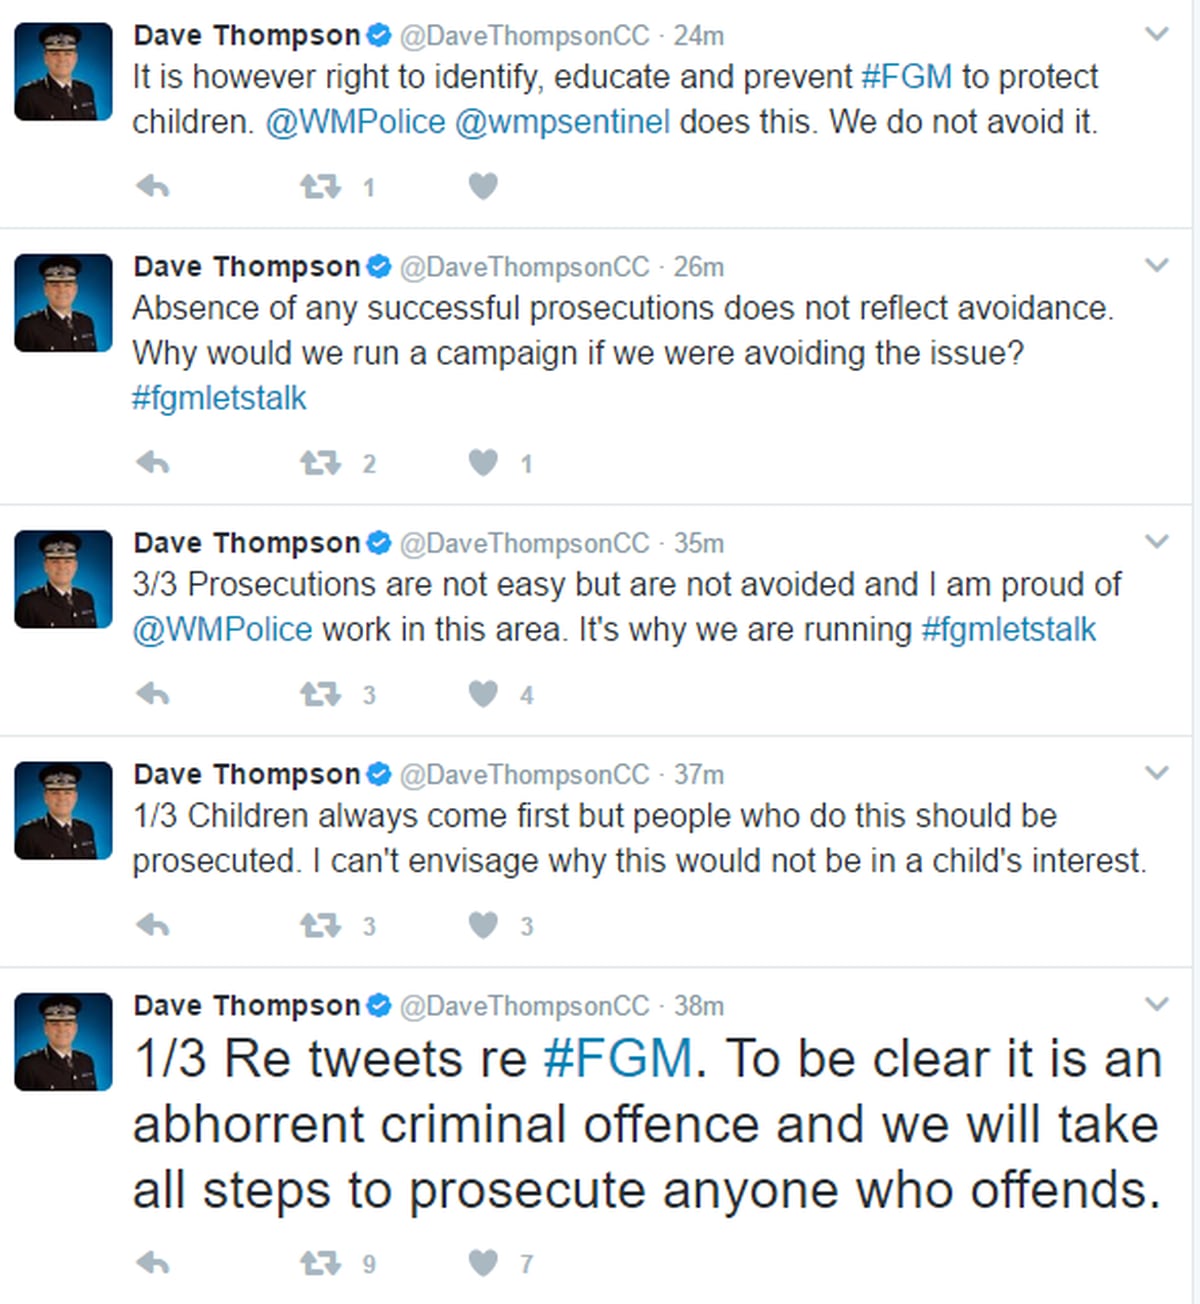 West Midlands Police chief constable Dave Thompson's reaction to the controversial tweet